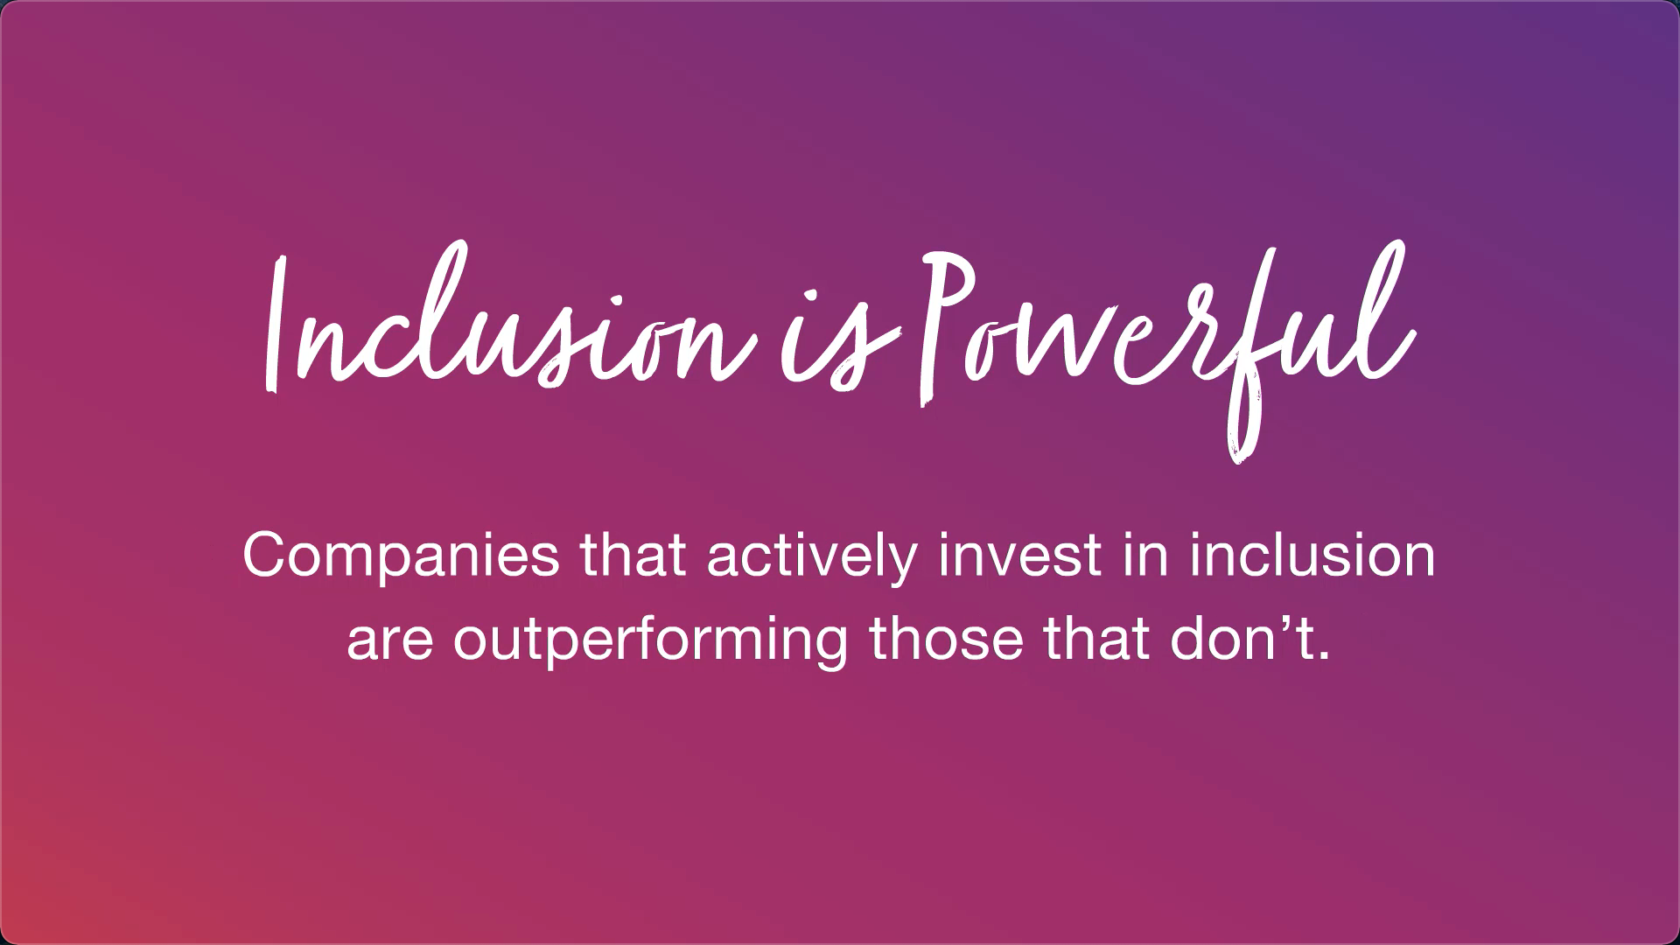 Inclusion is Powerful